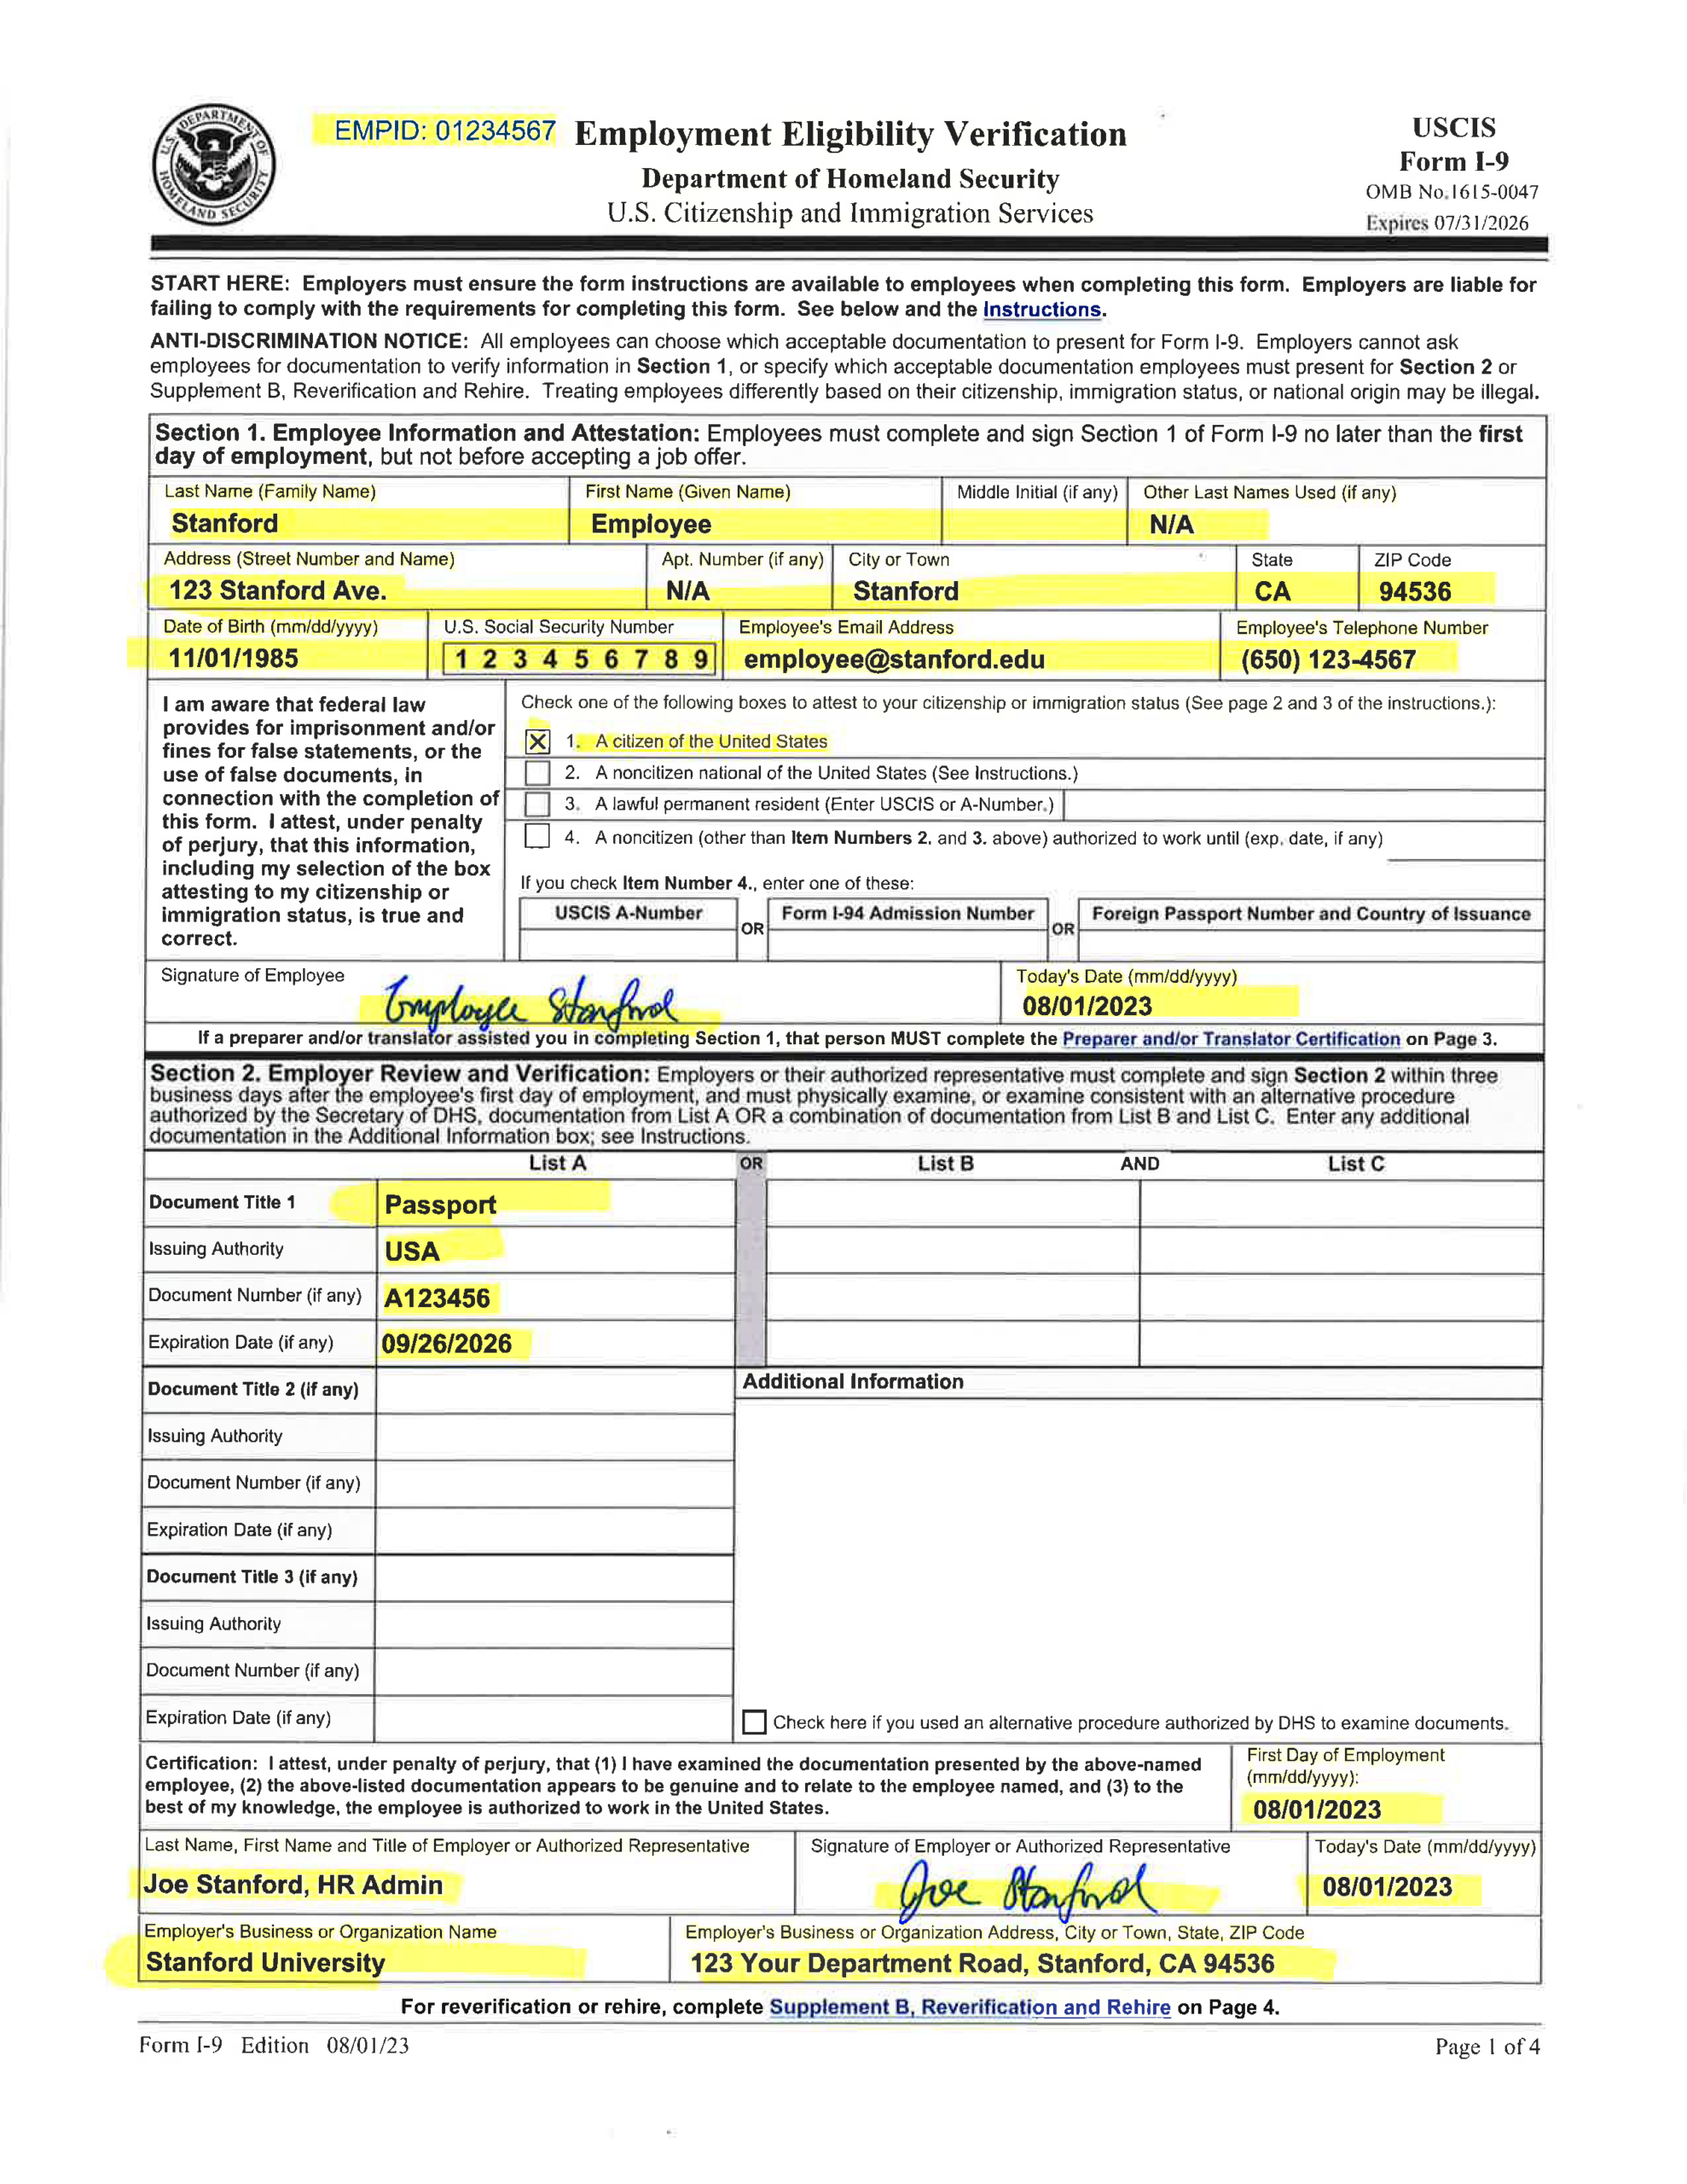 Examples Of Completed Form I-9 For Stanford inside I9 Form From USCIS